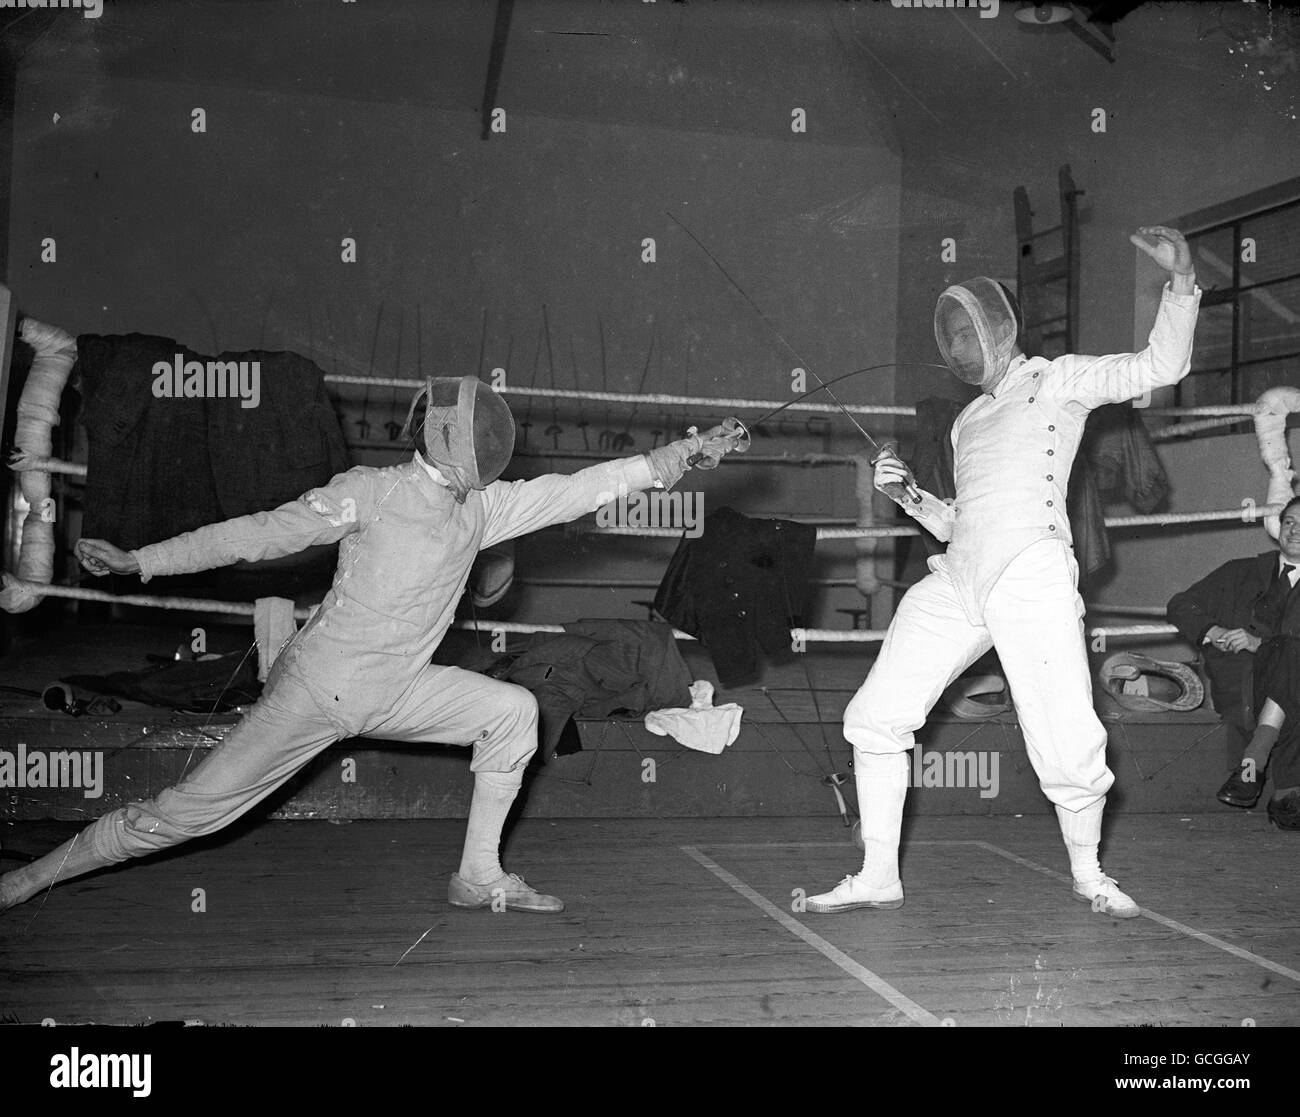 Fencing competition at Guys hospital - Edinburgh, Cambridge and London University.. L to R: MRF Gunningham (Cambridge) and JM Brudenall (London) in an Epee dual. Stock Photo